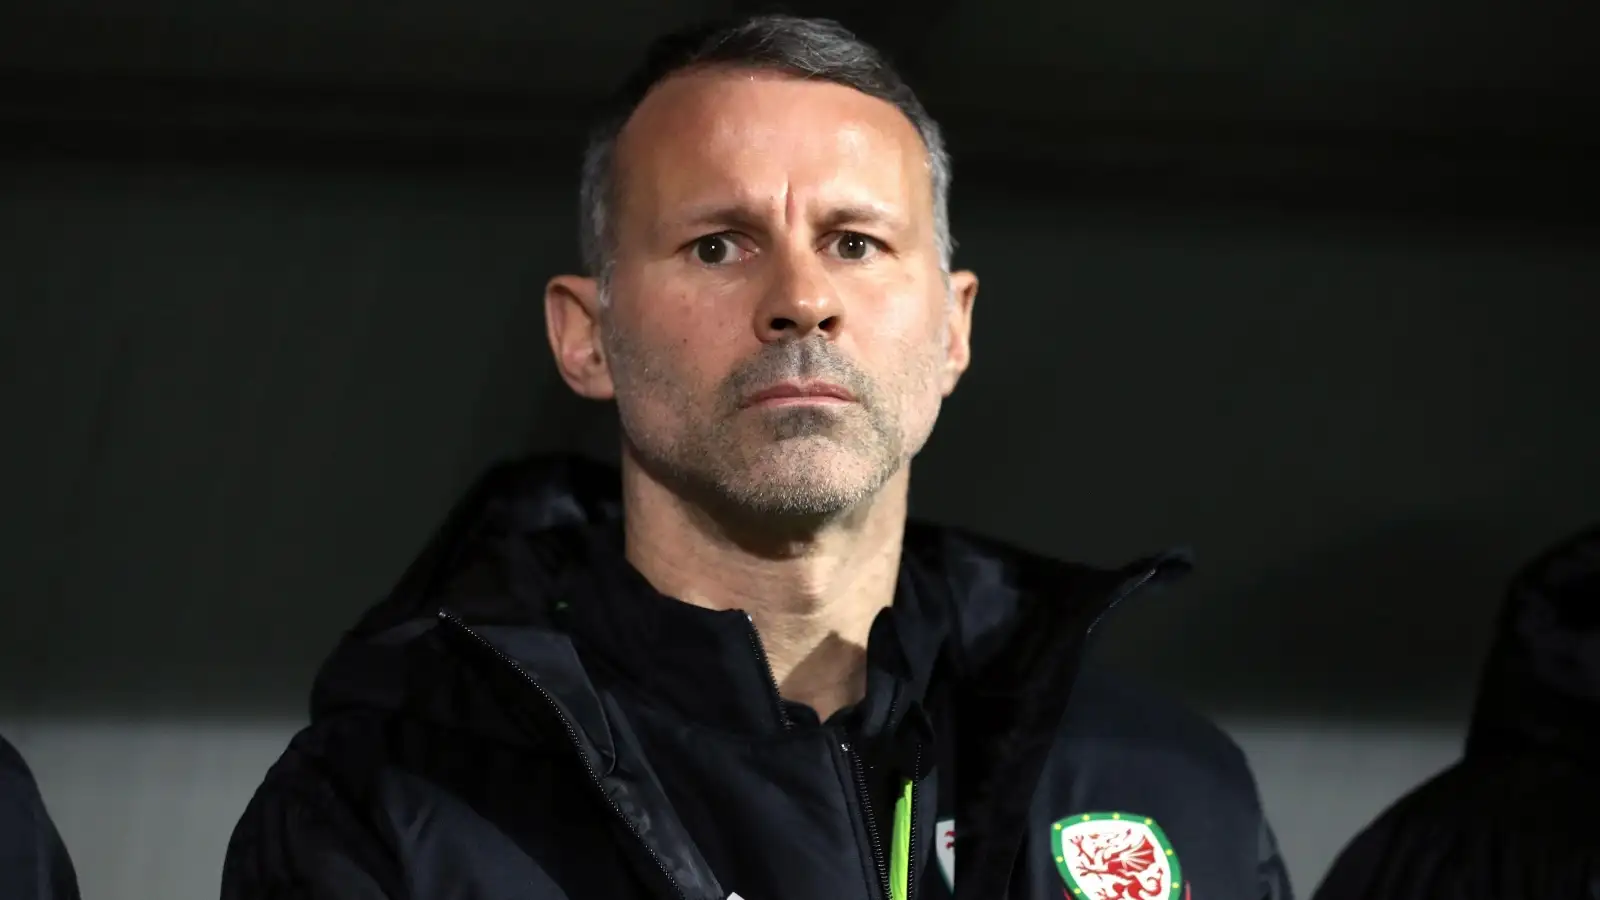 Wales manager Ryan Giggs during a match